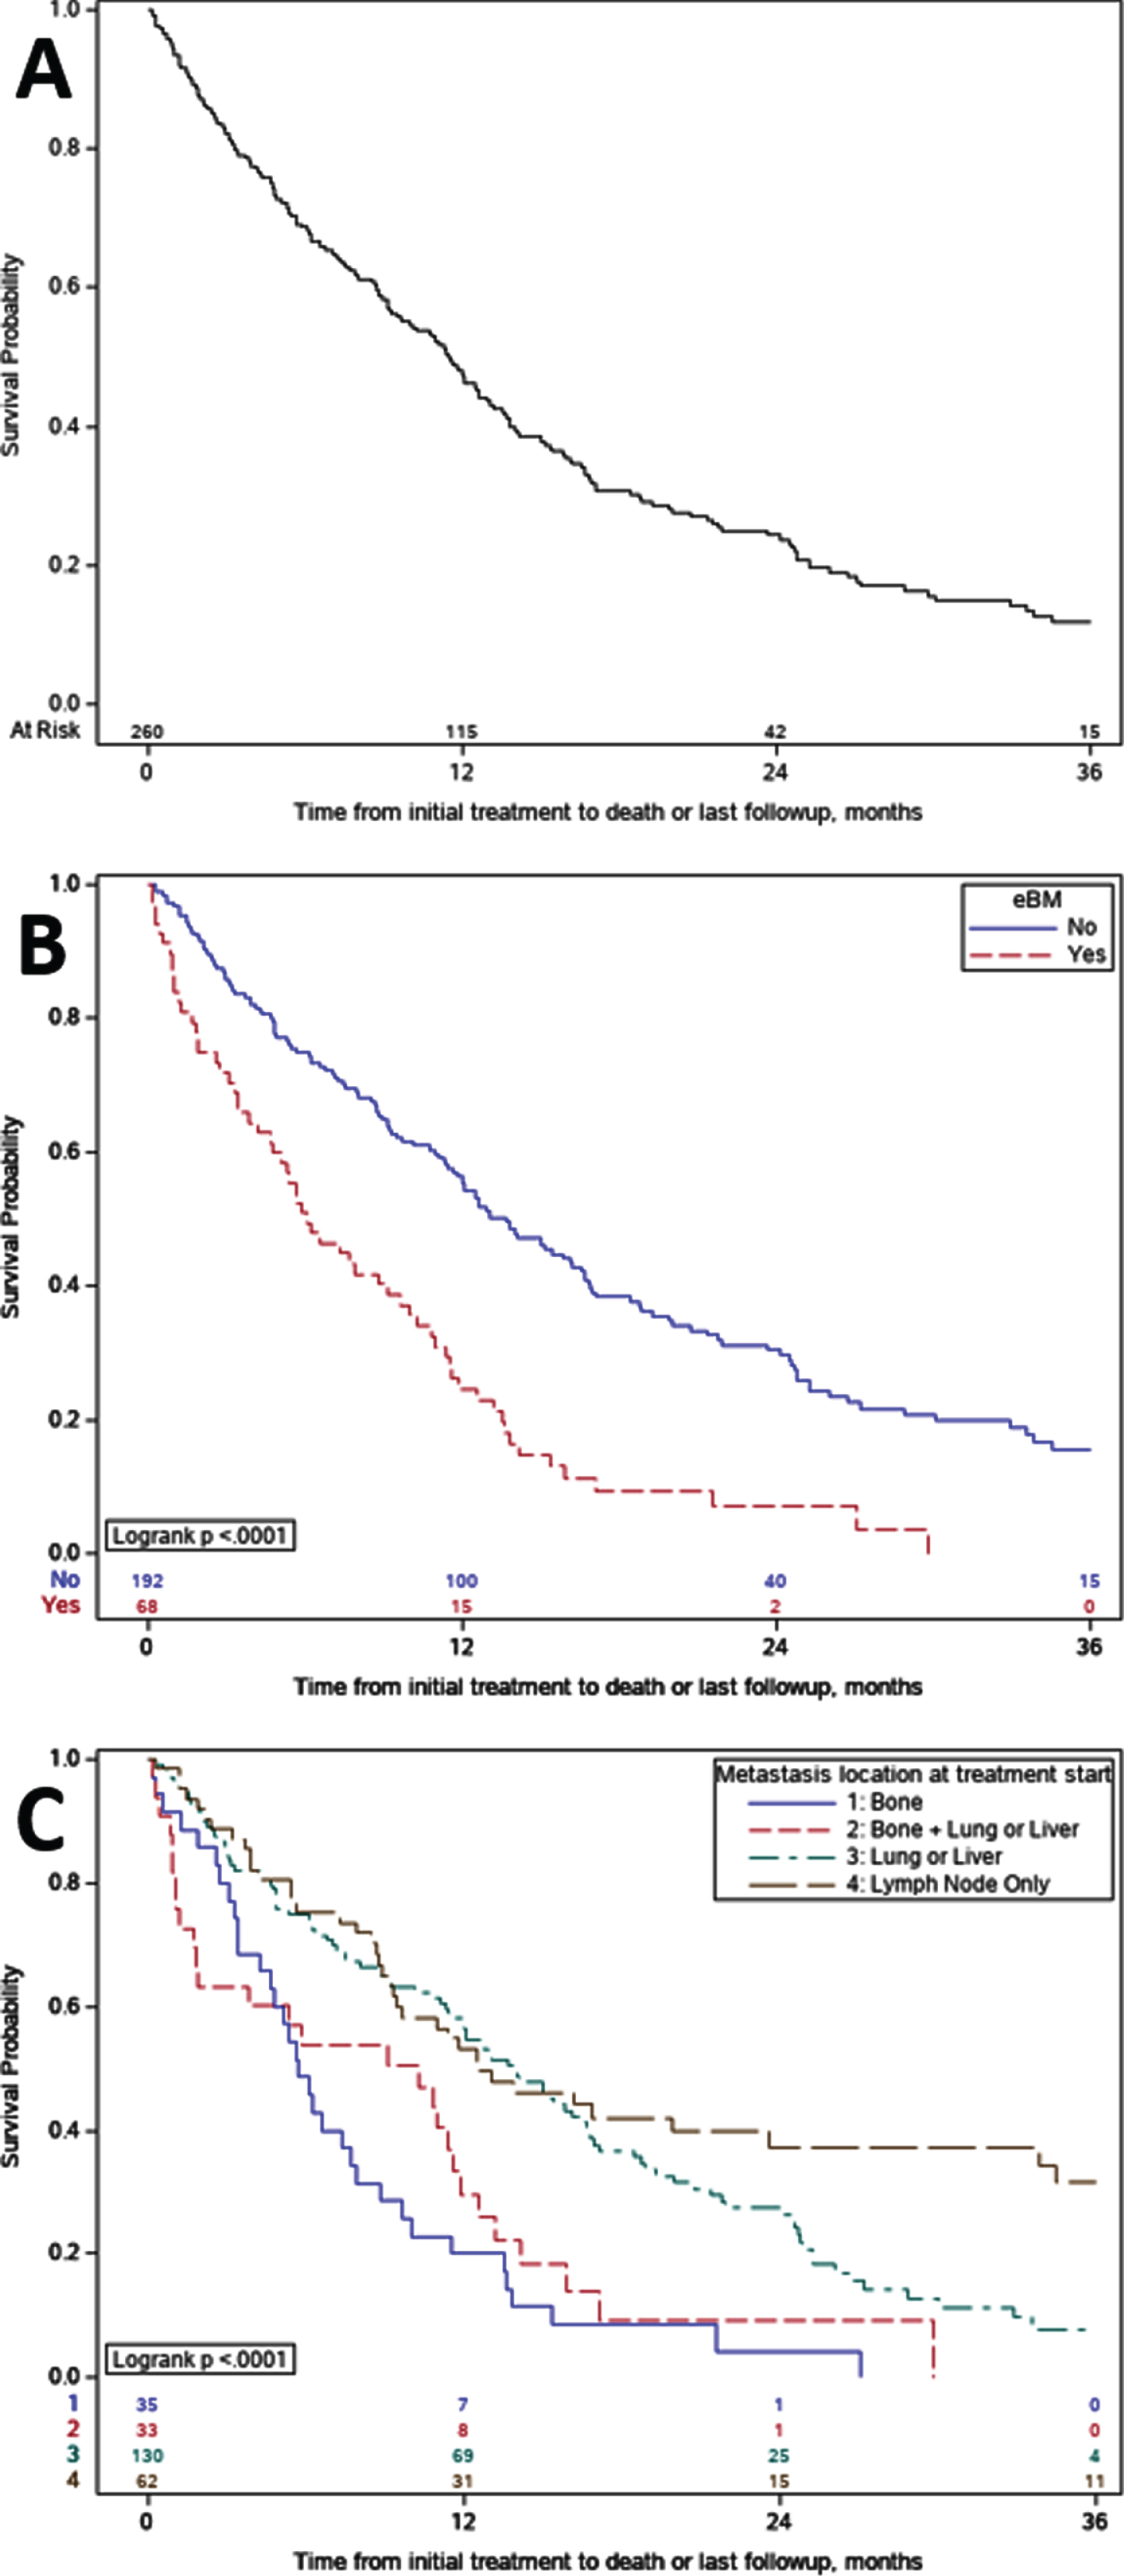 Kaplan- Meier Overall Survival. A. Overall survival for the entire cohort was 11.5 months; B. Overall survival for patients with early bone metastases versus no bone metastases. Median overall survival was 6.1 versus 13.7 months (p < 0.0001), respectively; C. Overall survival subgroup comparisons amongst those with bone-only, mixed, and non-bone shows, C1 Bone without other visceral sites OS was 5.7 months, C2 Bone and other visceral sites OS was 10.3 months, C3 Non bone visceral sites OS was 13.8 months and C4 Neither visceral nor bone OS was 12.5 months; grouping includes one patient with only CNS metastases.